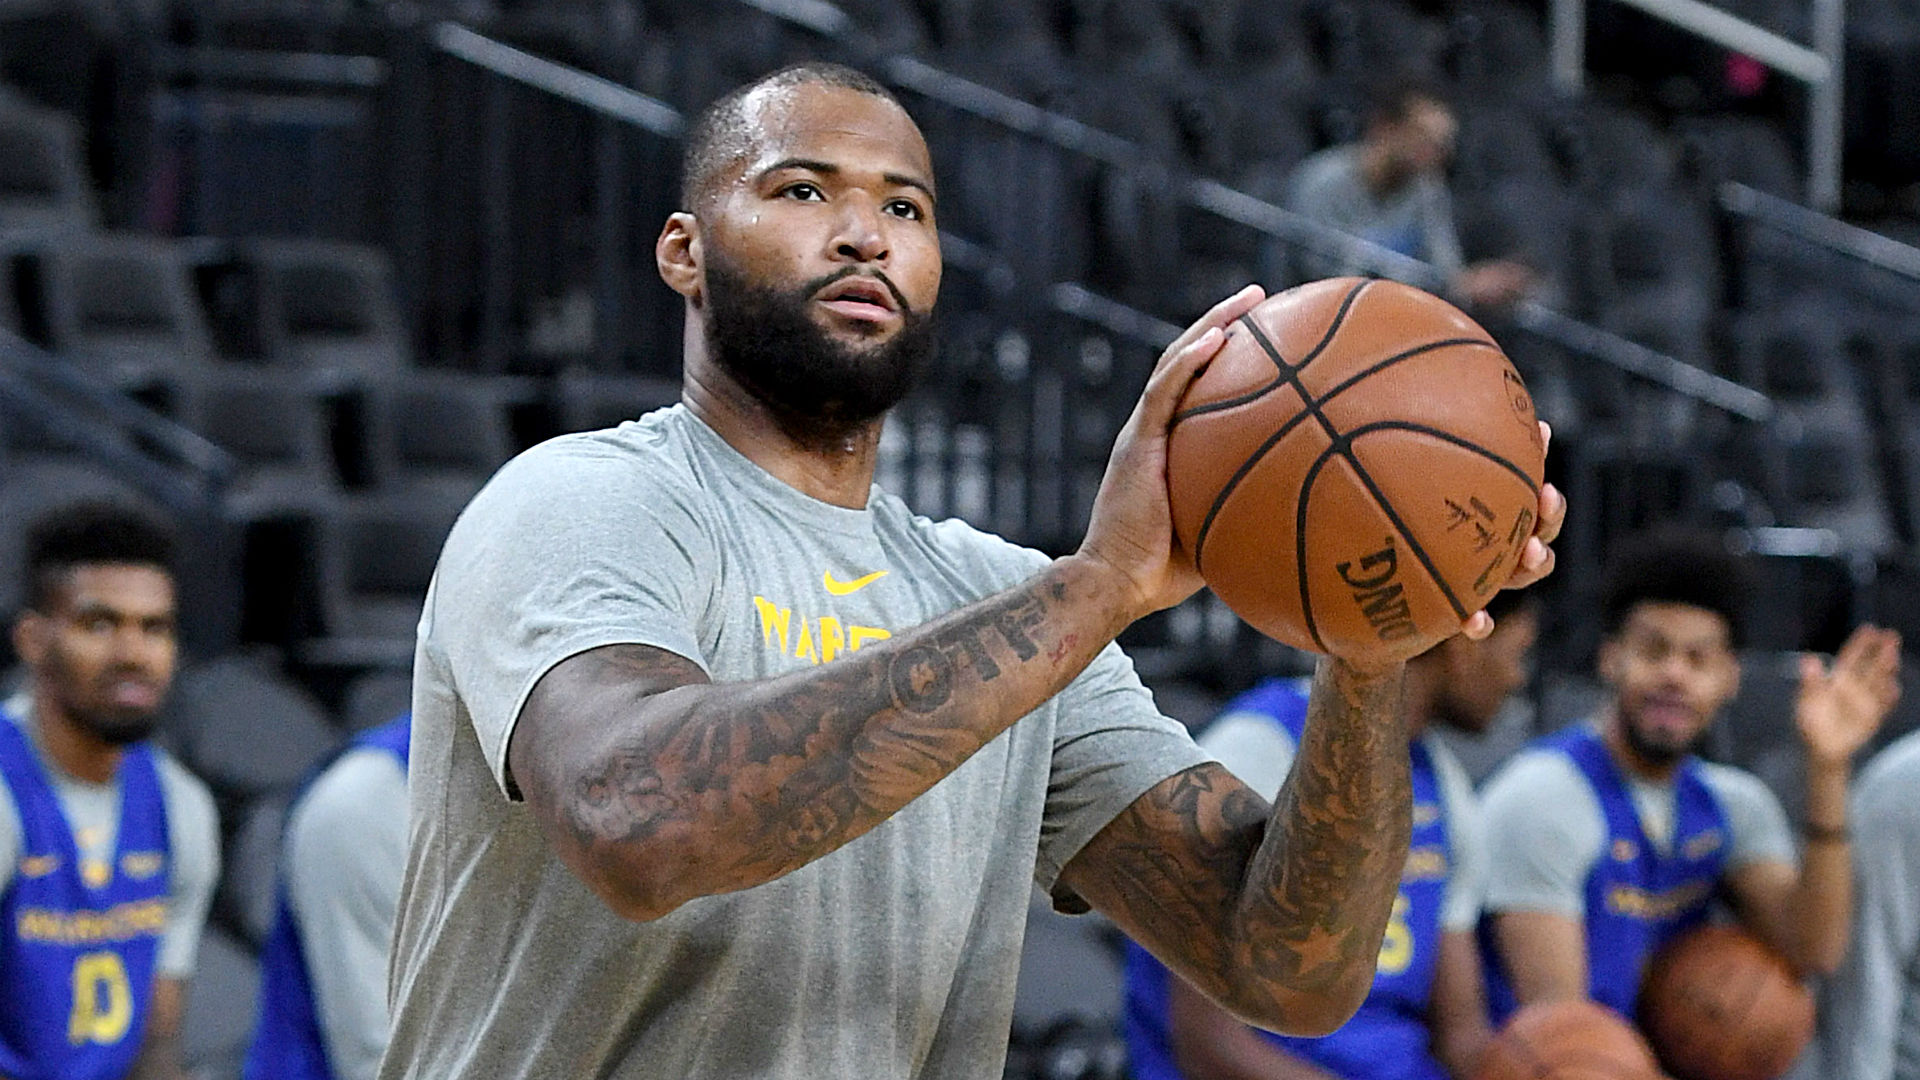 Steve Kerr is looking forward to getting to grips with DeMarcus Cousins, a player unlike any the Golden State Warriors have had before.